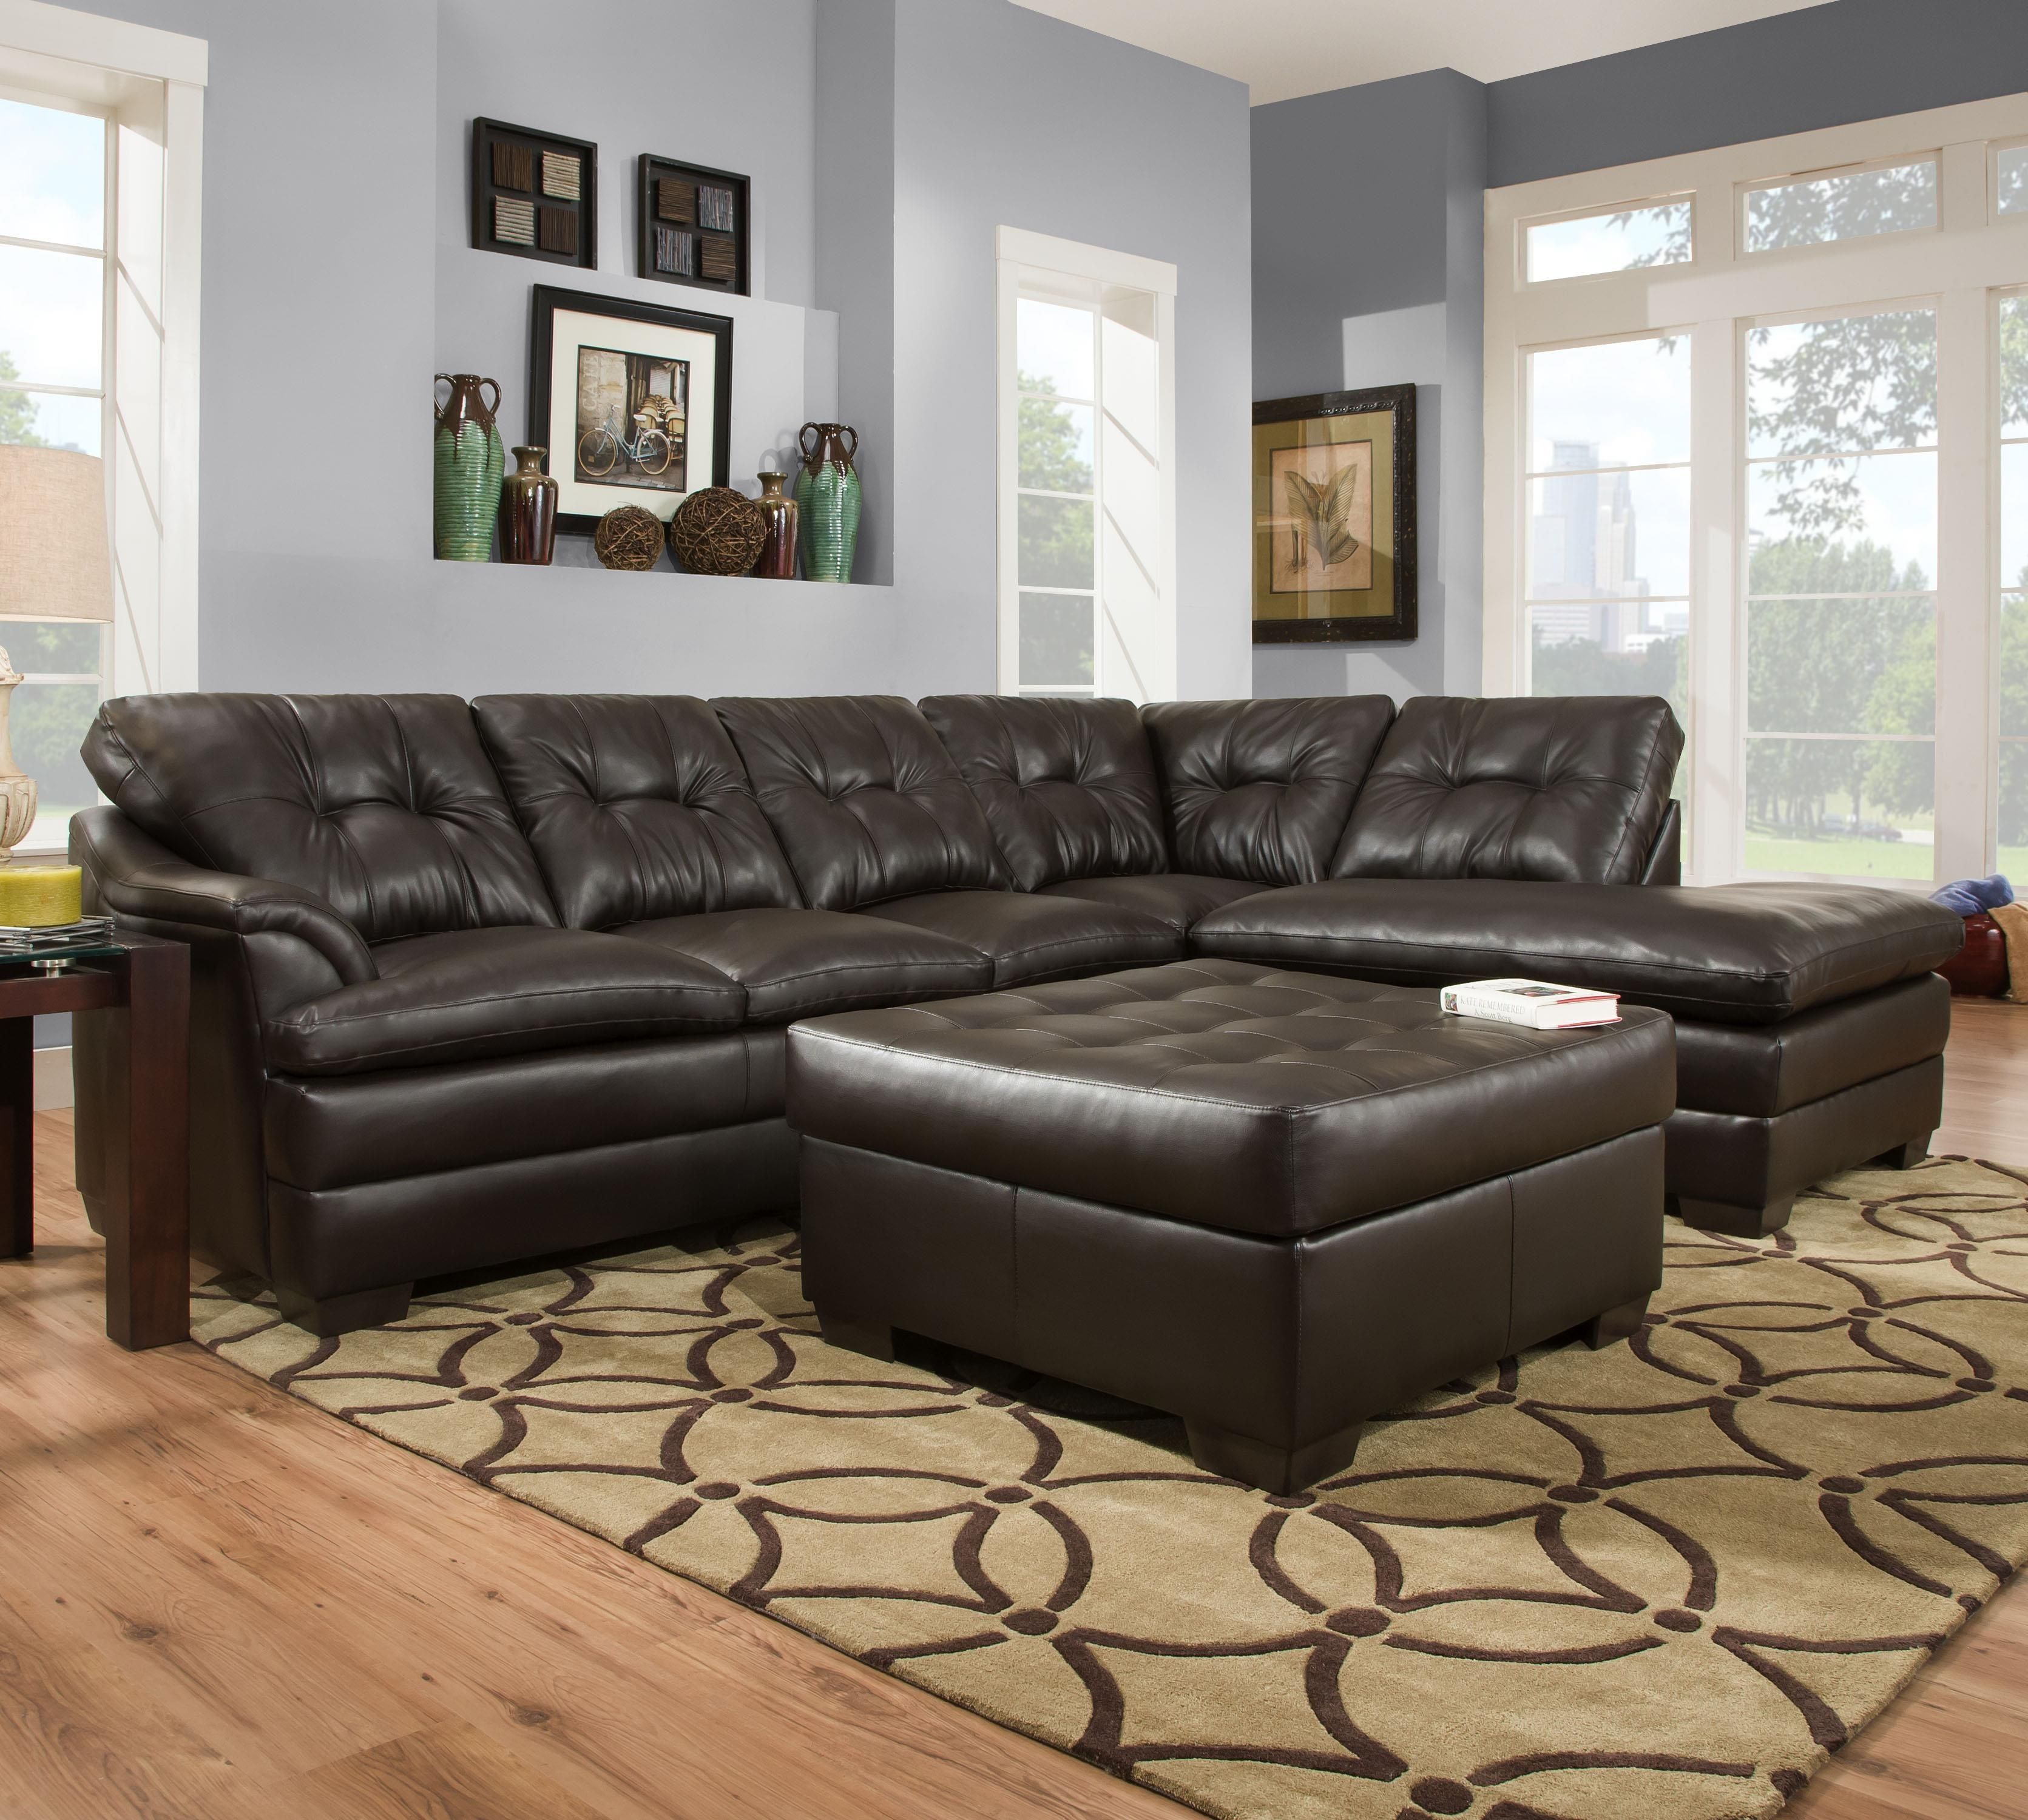 Brown Leather Sectional Sofa Canada Sleeper Recliner Ashley With Royal Furniture Sectional Sofas (View 3 of 10)